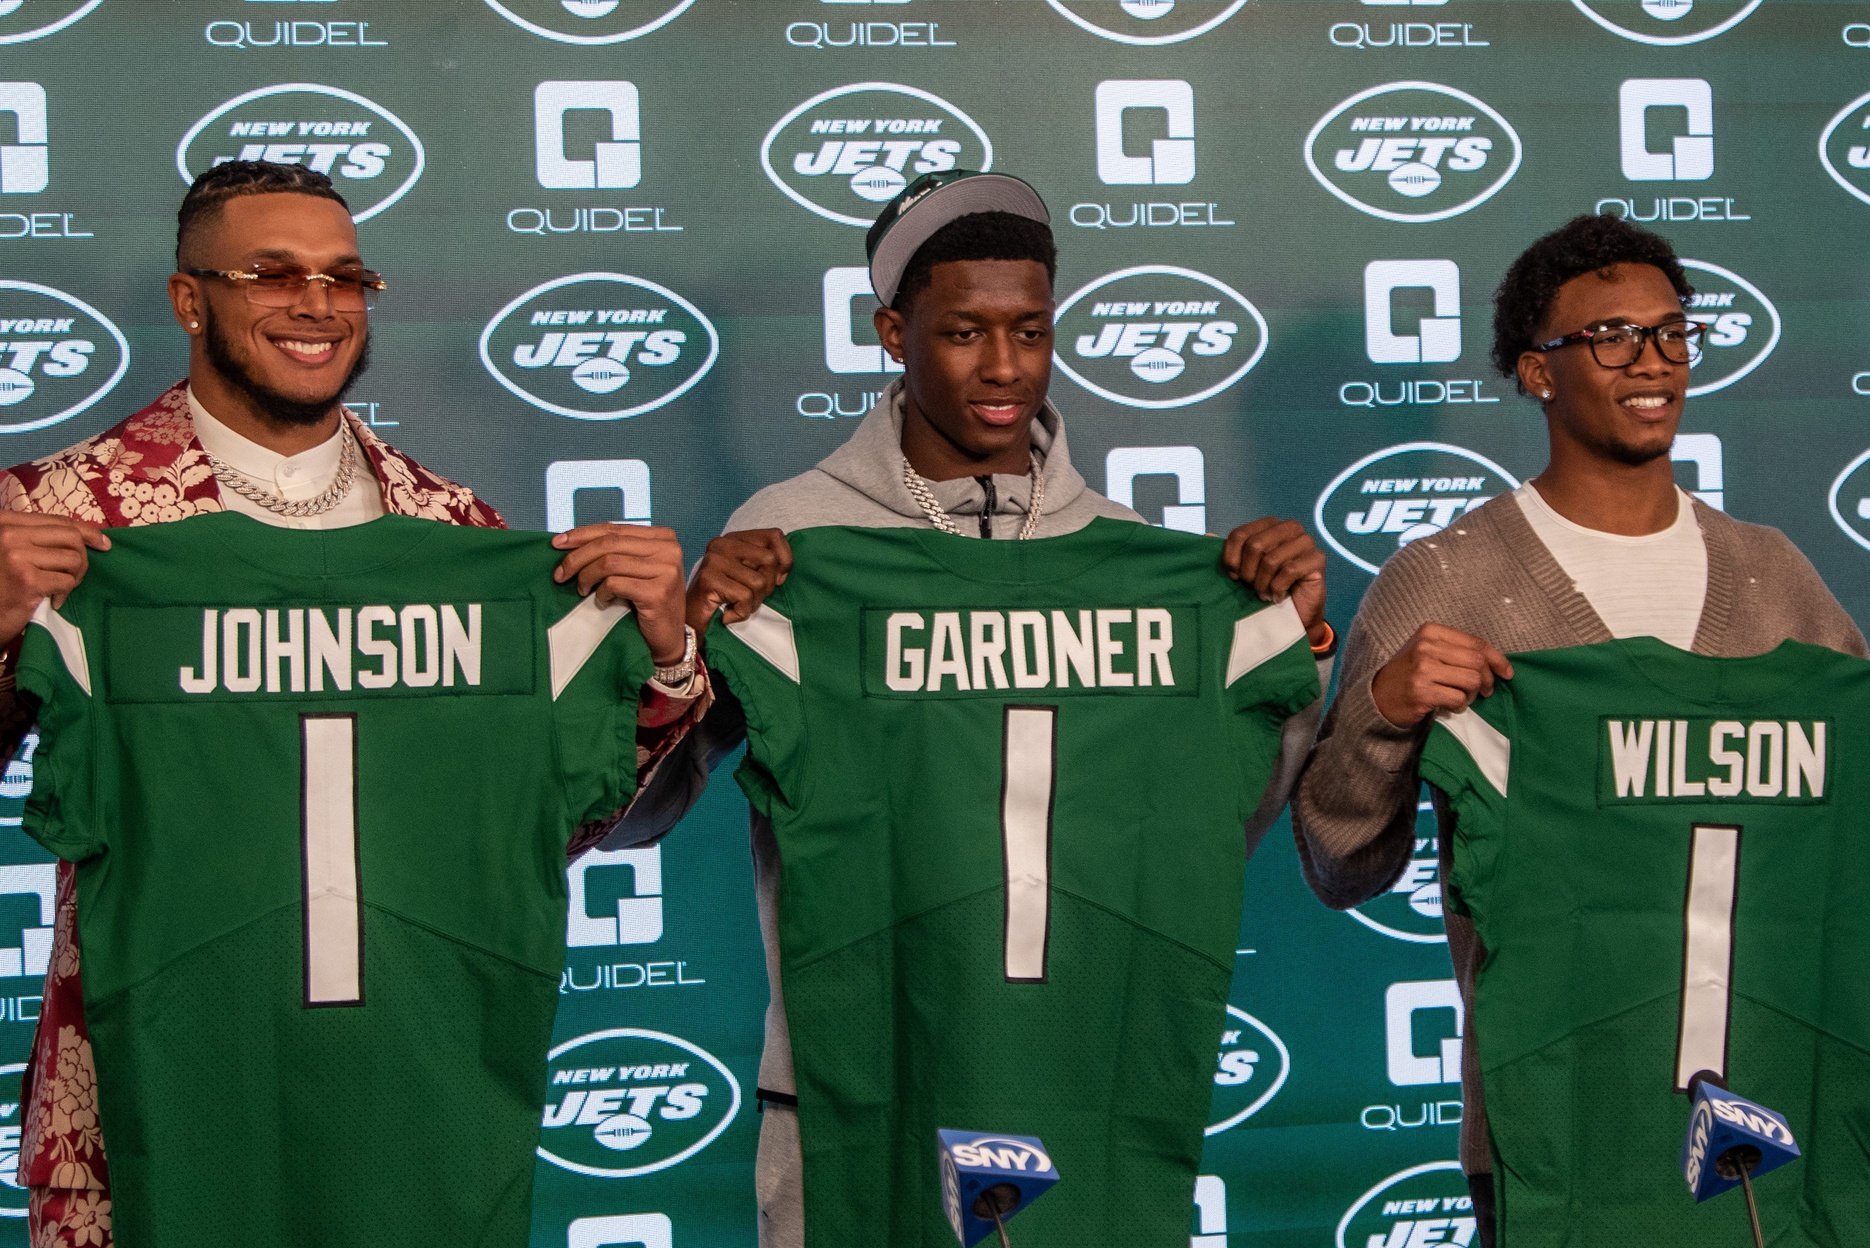 Jets will have the 13th pick in the 2023 draft